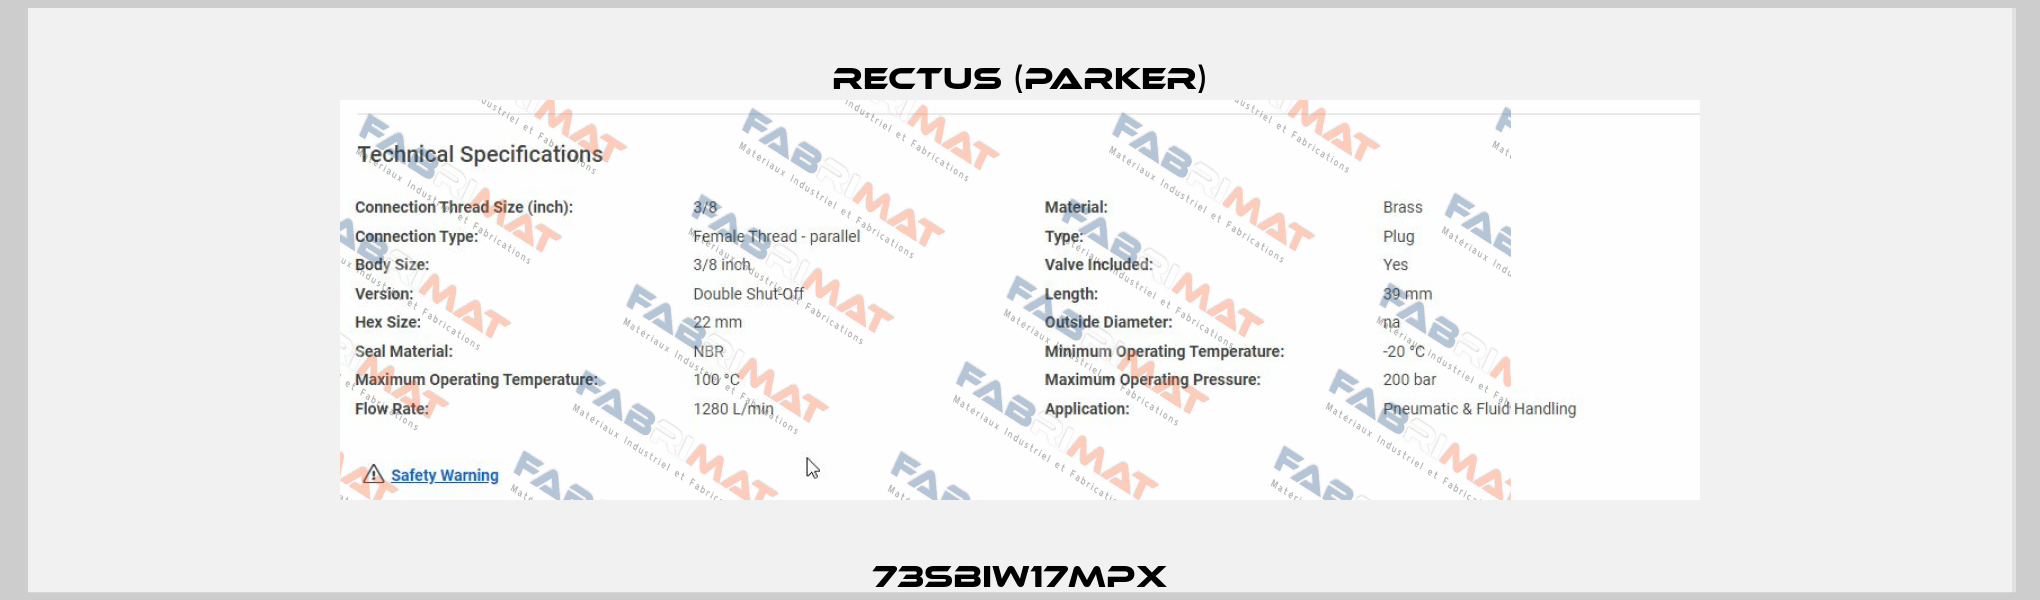 73SBIW17MPX Rectus (Parker)